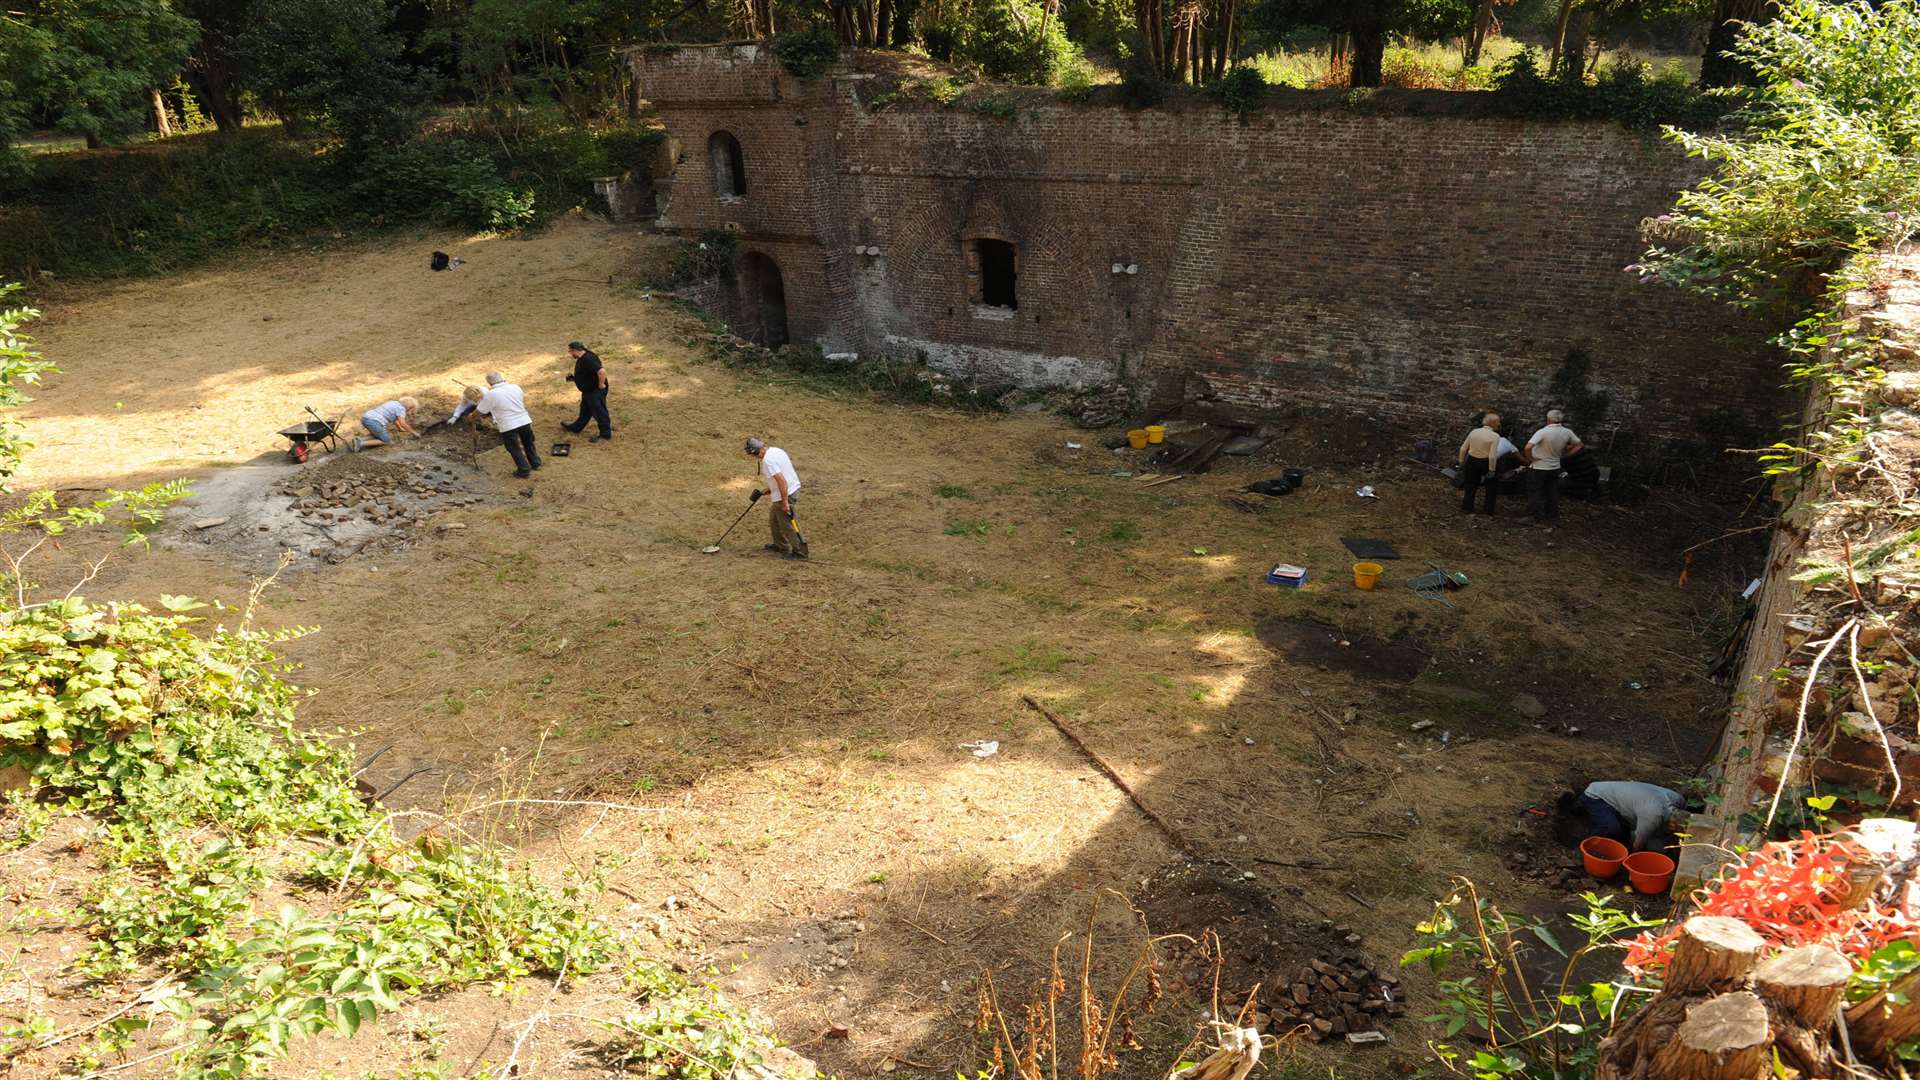 An archaeological dig in The Sunken Courtyard